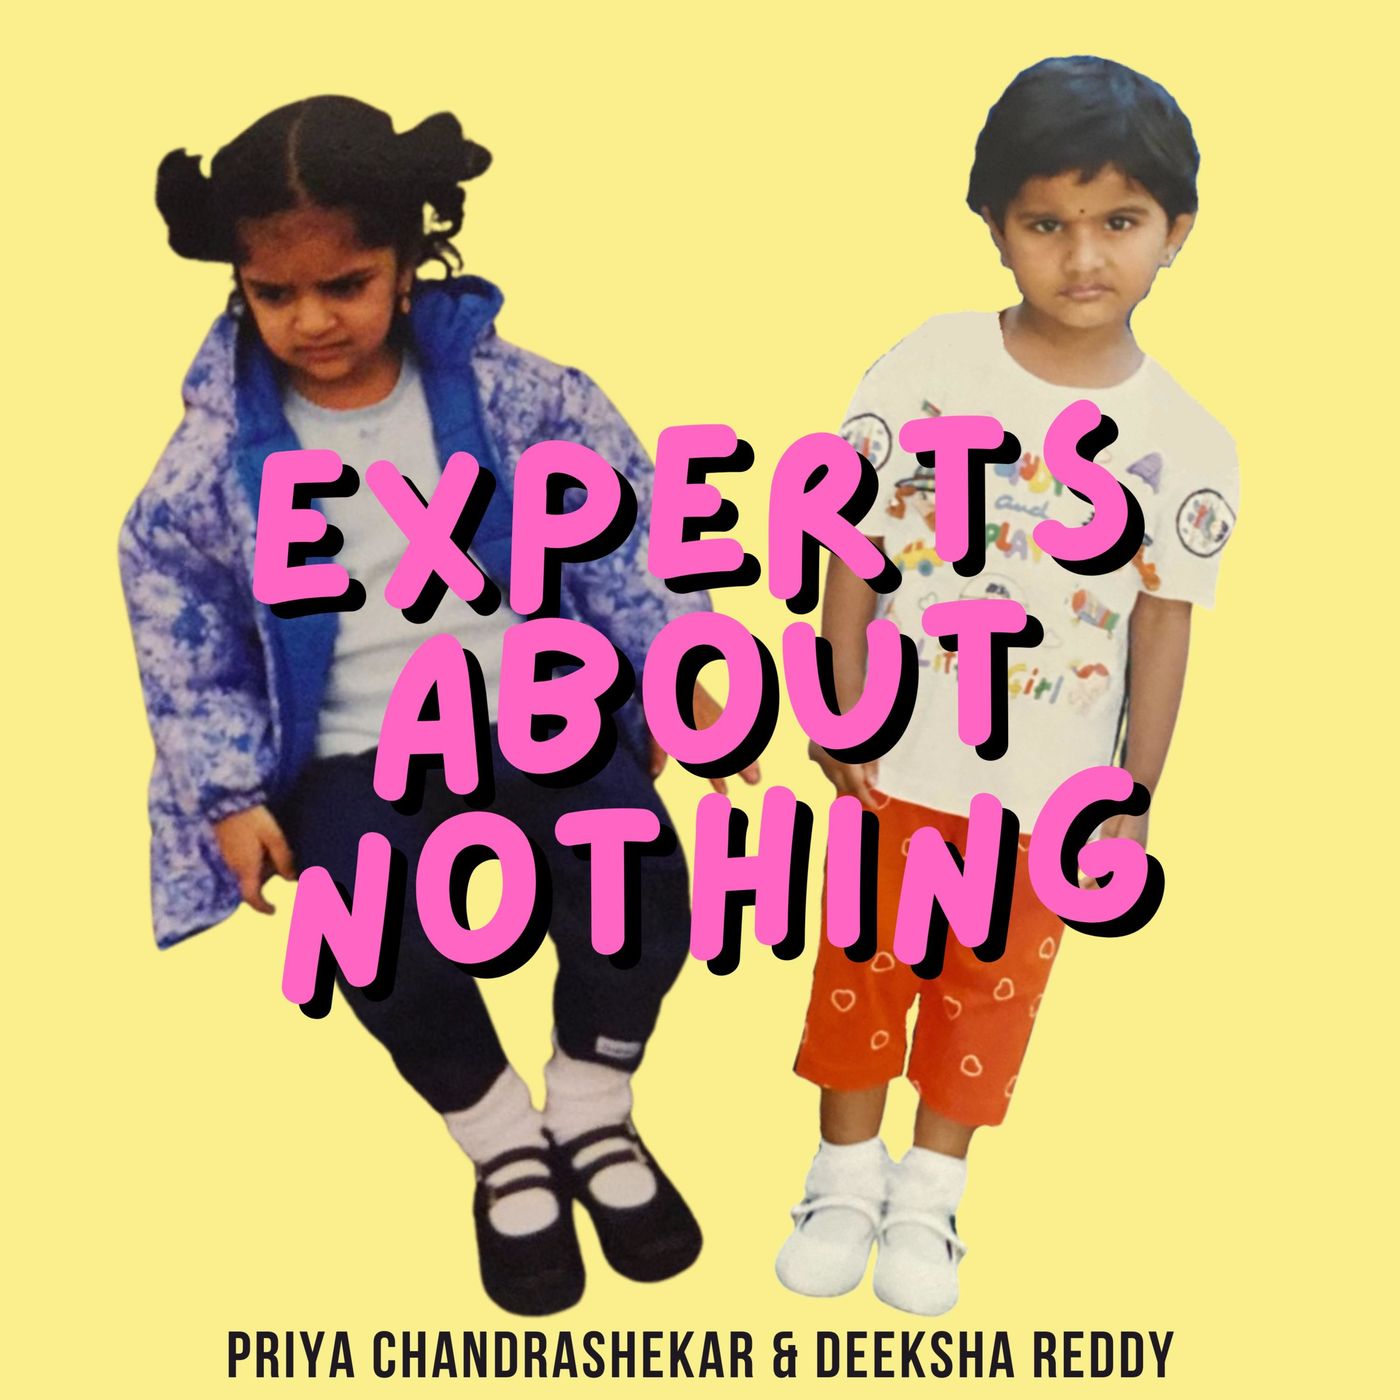 Experts About Nothing